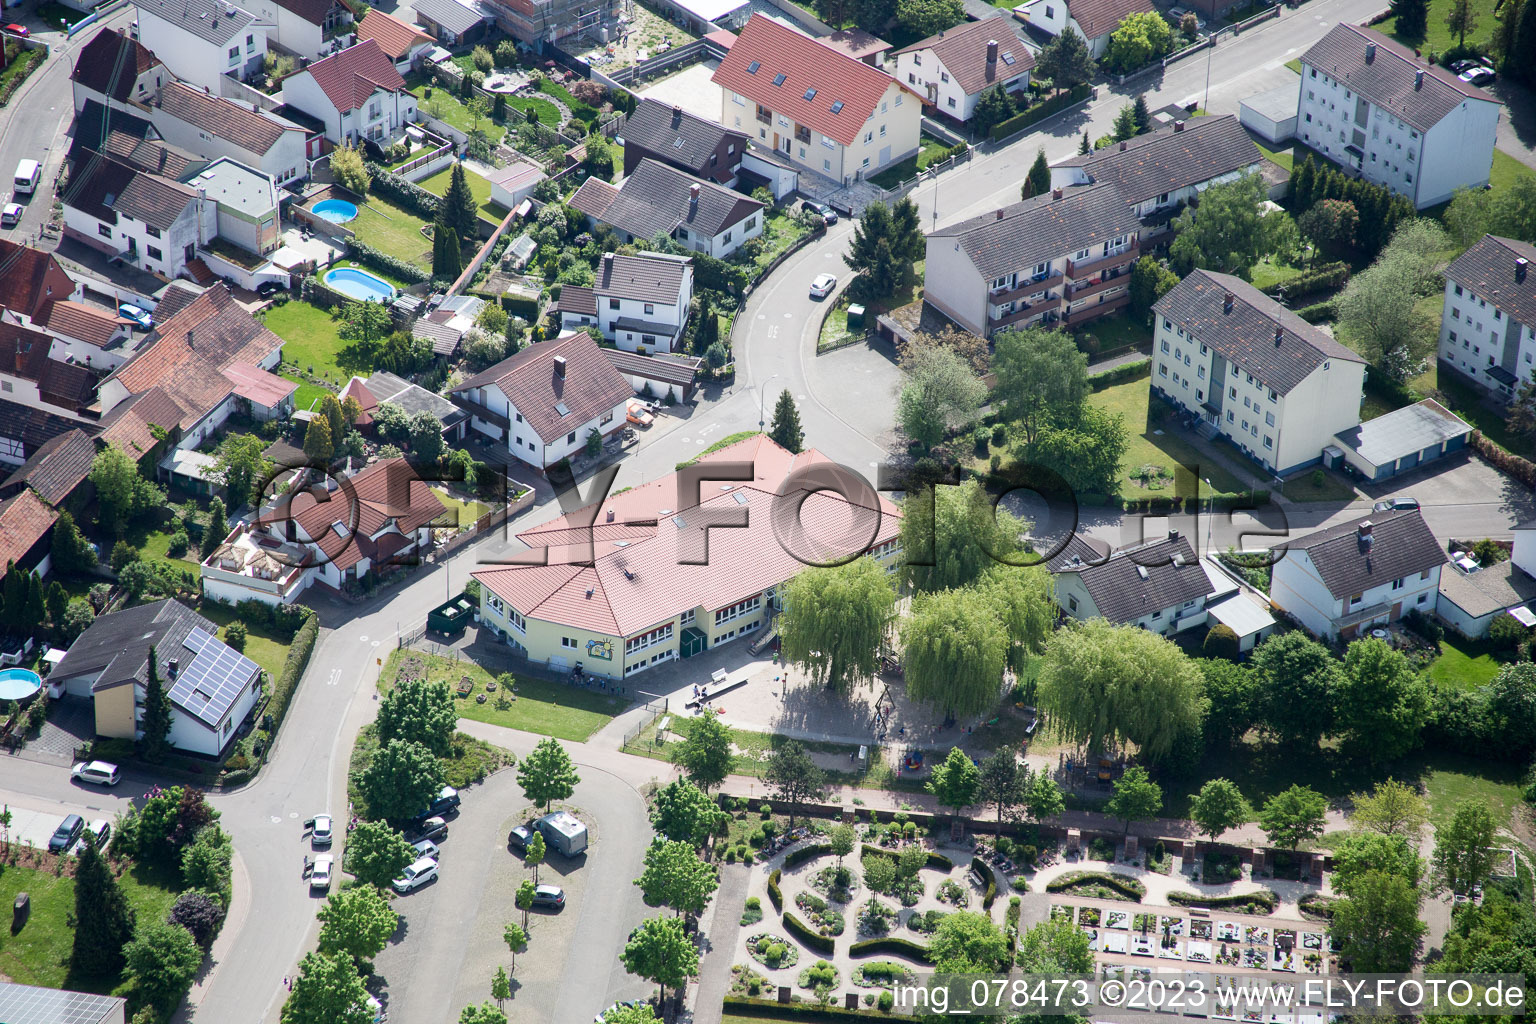 Hagenbach in the state Rhineland-Palatinate, Germany out of the air